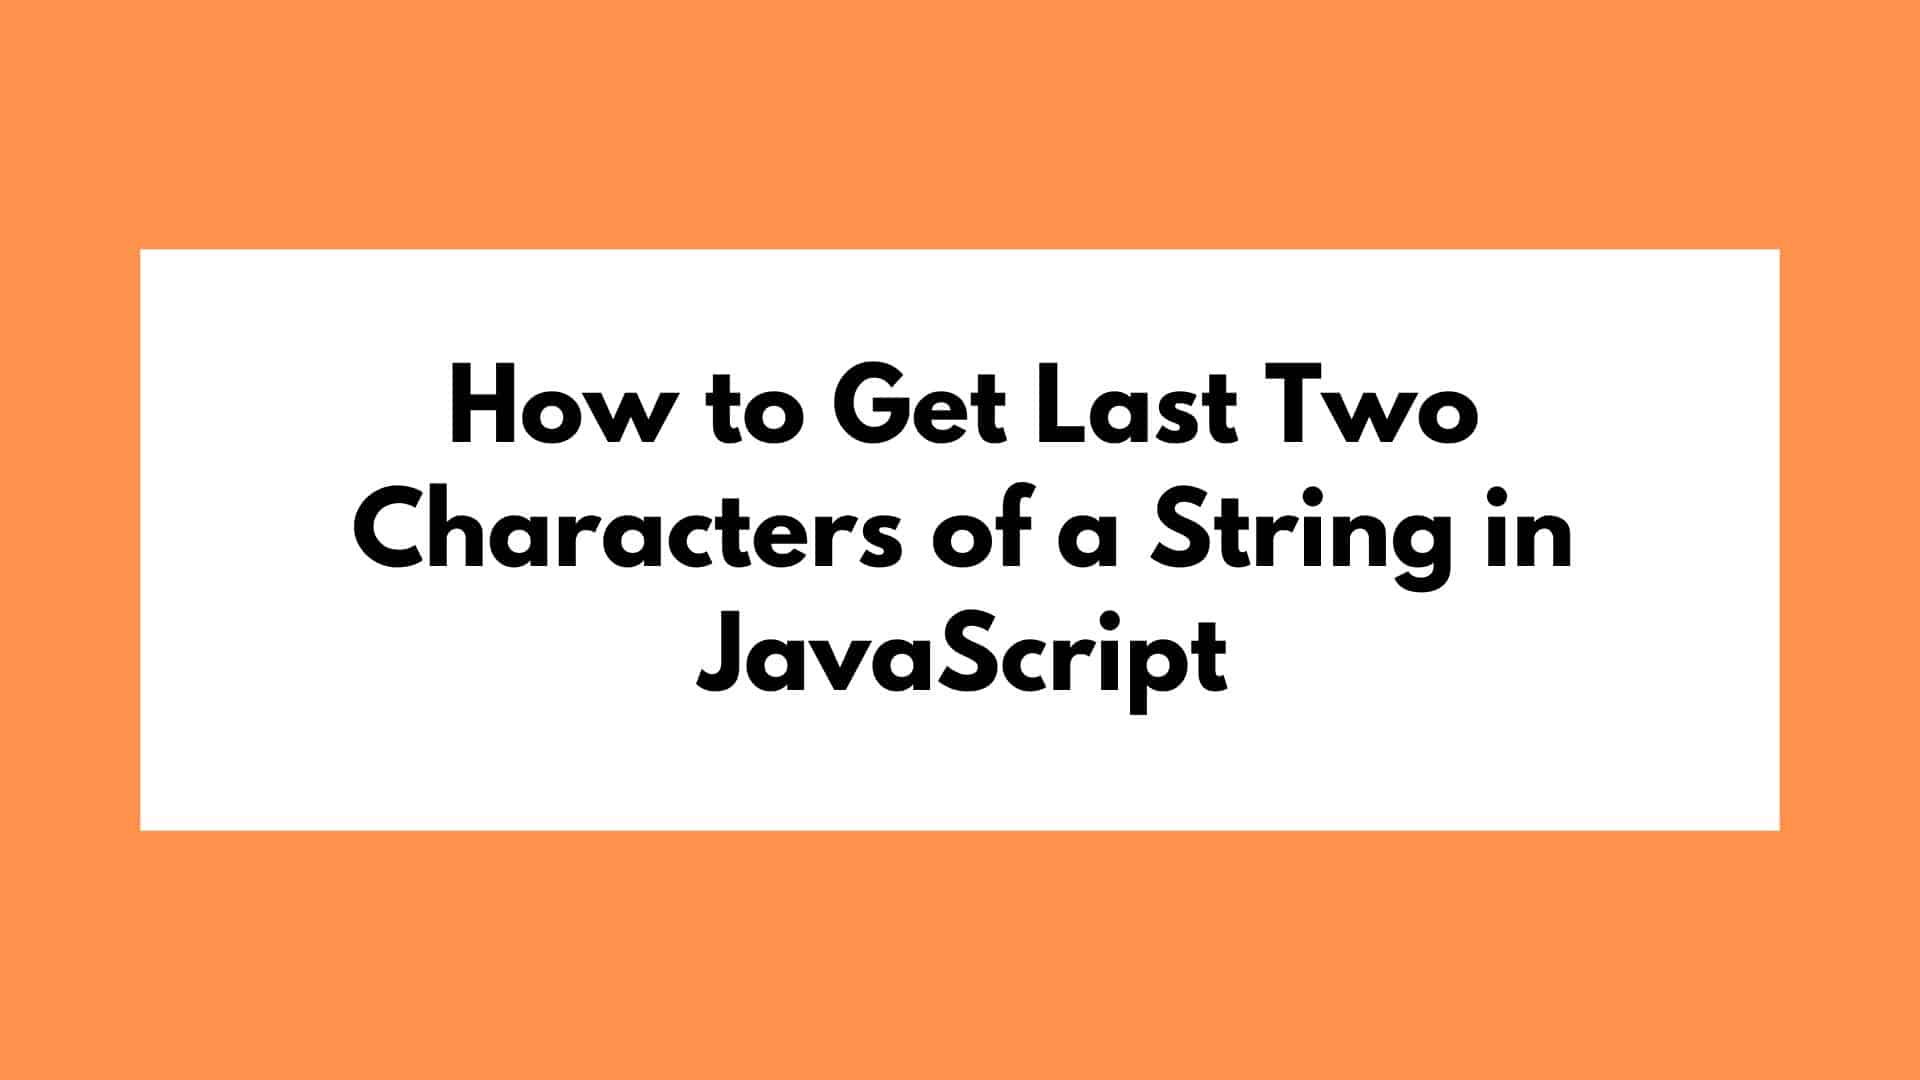 How to Get Last Two Characters of a String in JavaScript